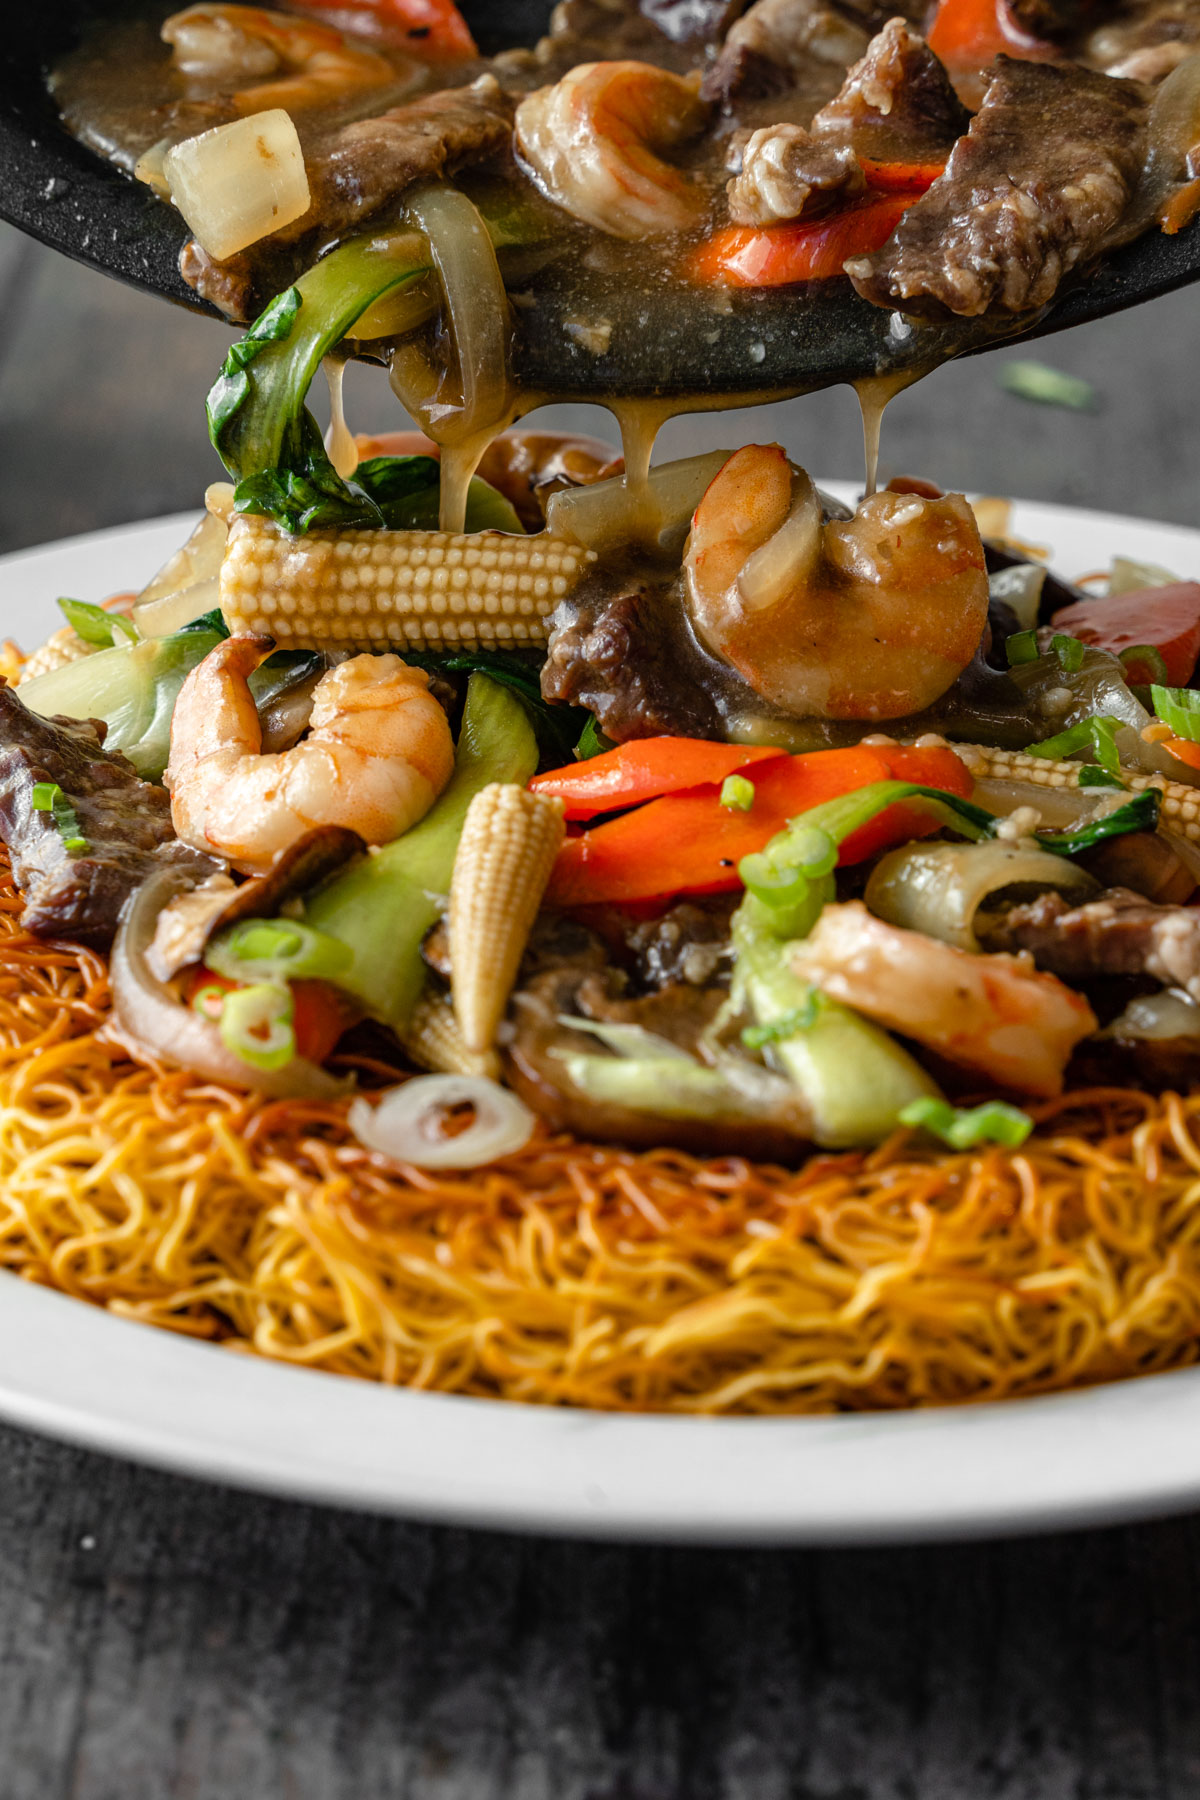 Pouring gravy with meat and vegetables on top of crispy noodles on a plate.